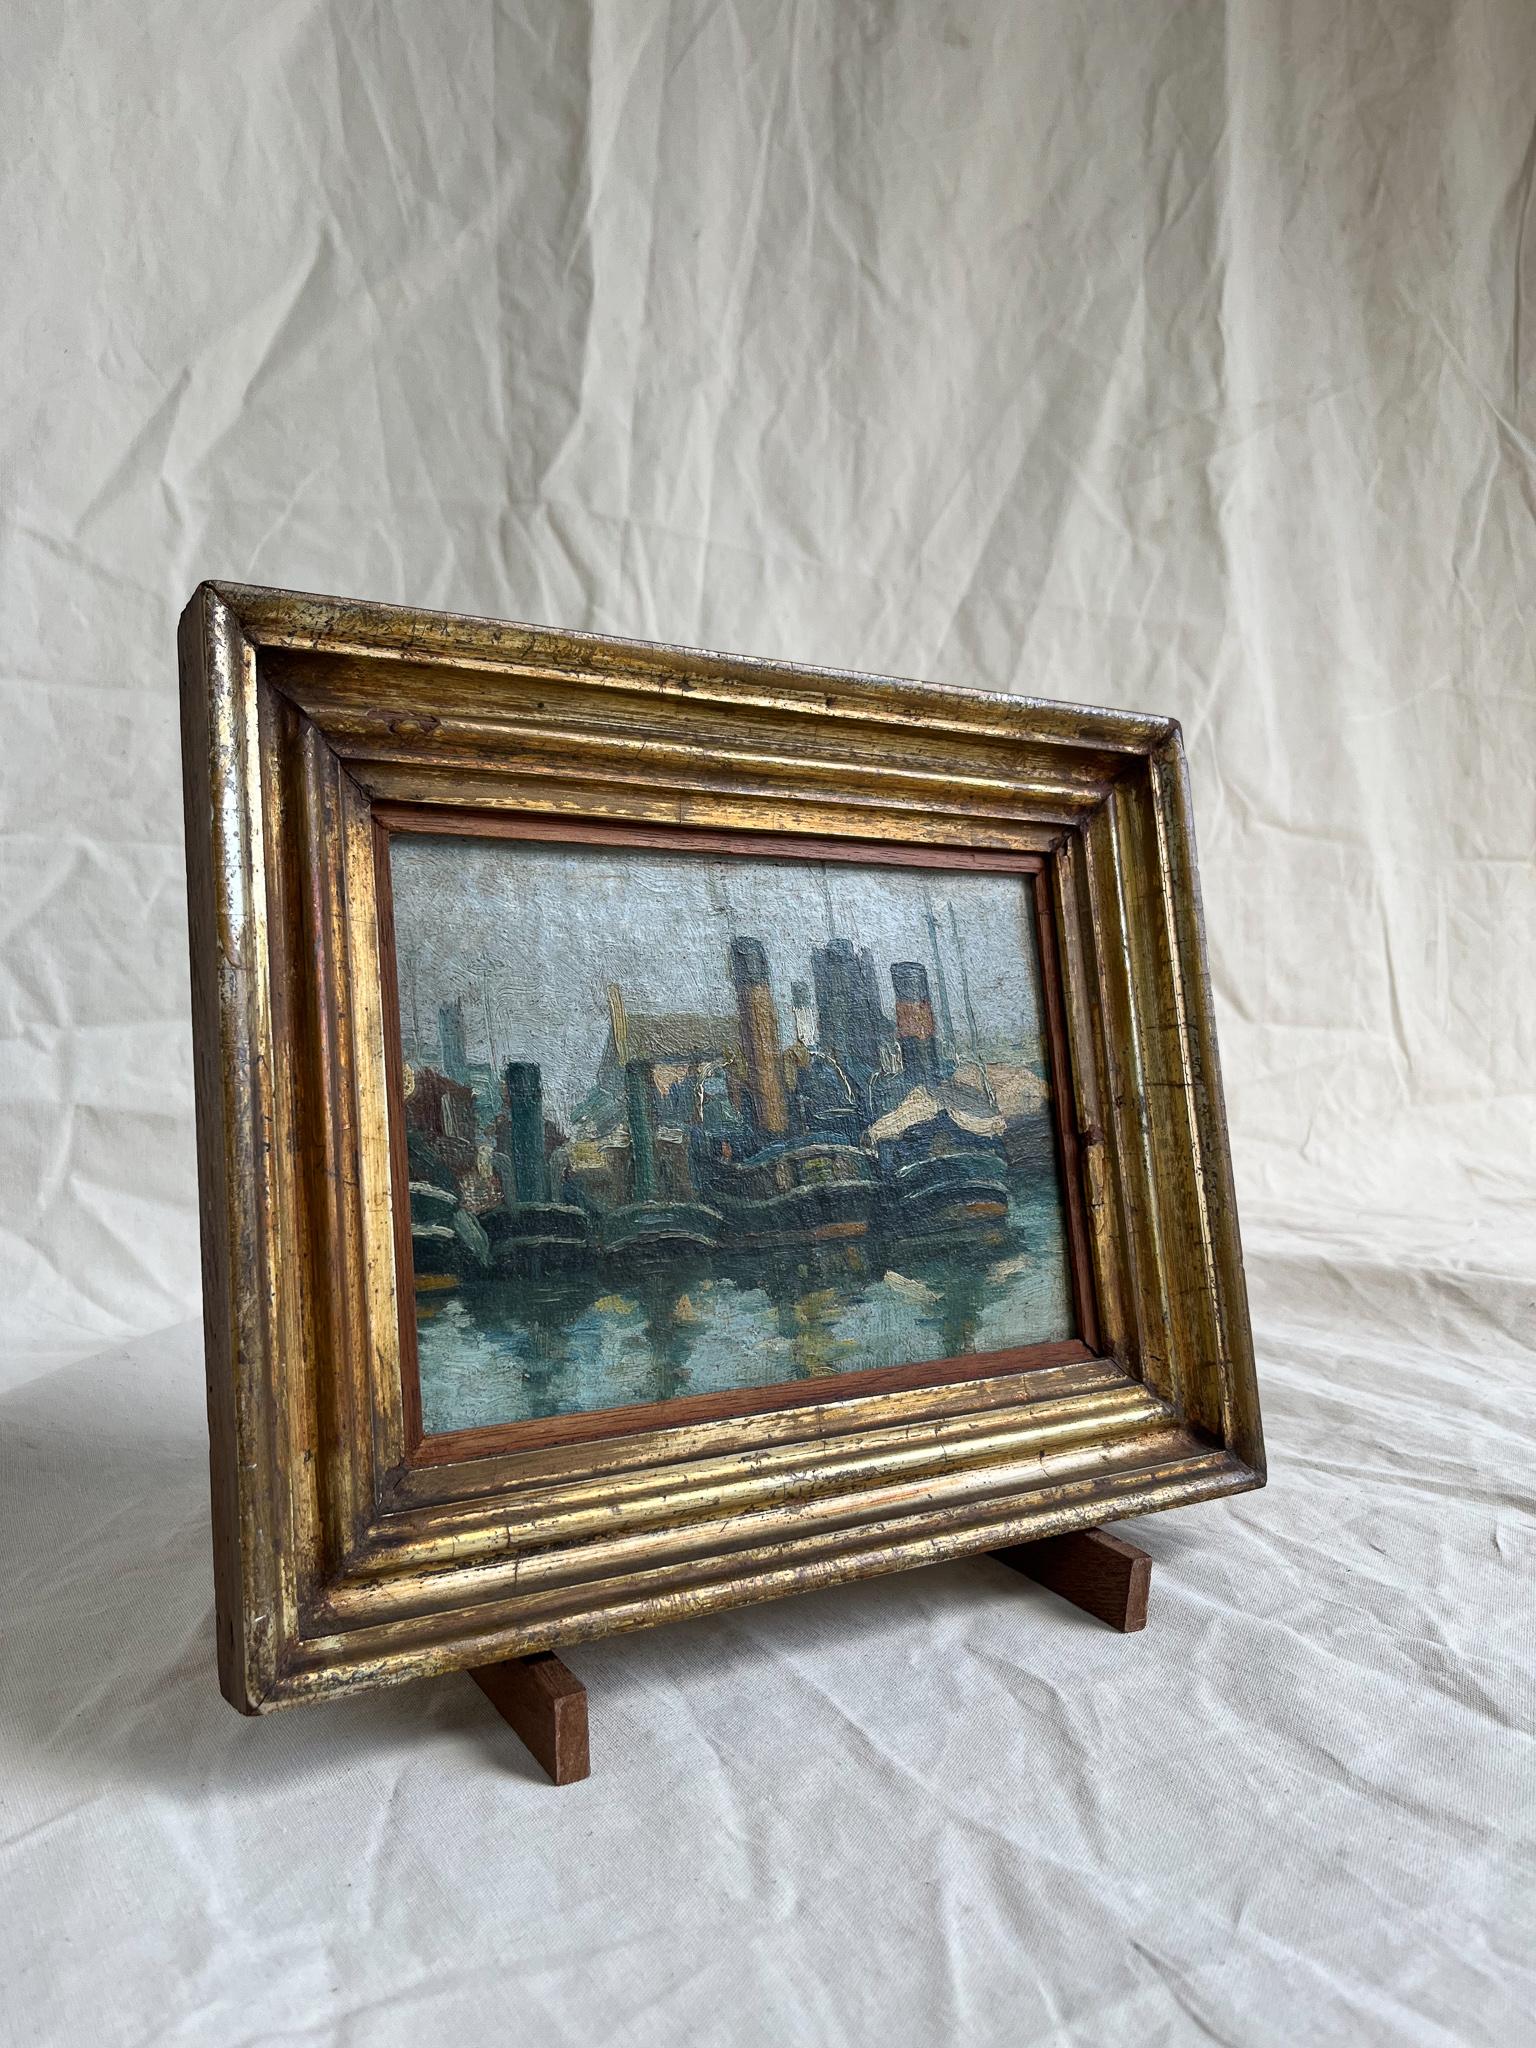 Boat port, oil on wood. Not signed.
From France.